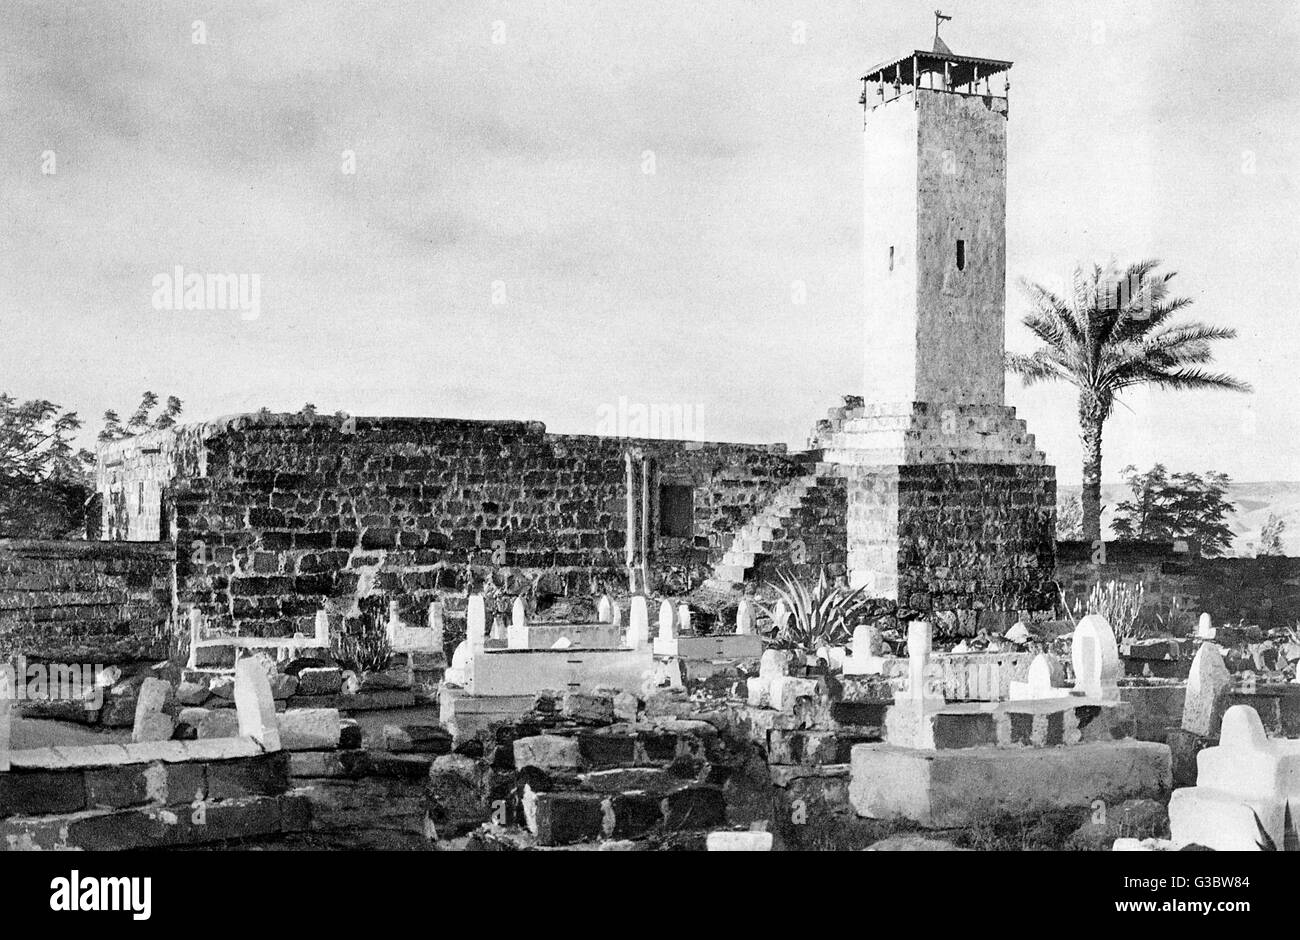 View of the mosque and cemetery at Beisan (Beit She'an, Beesan, Bisan), Holy Land, at the junction of the Jordan River Valley and the Jezreel Valley.      Date: 1920s Stock Photo